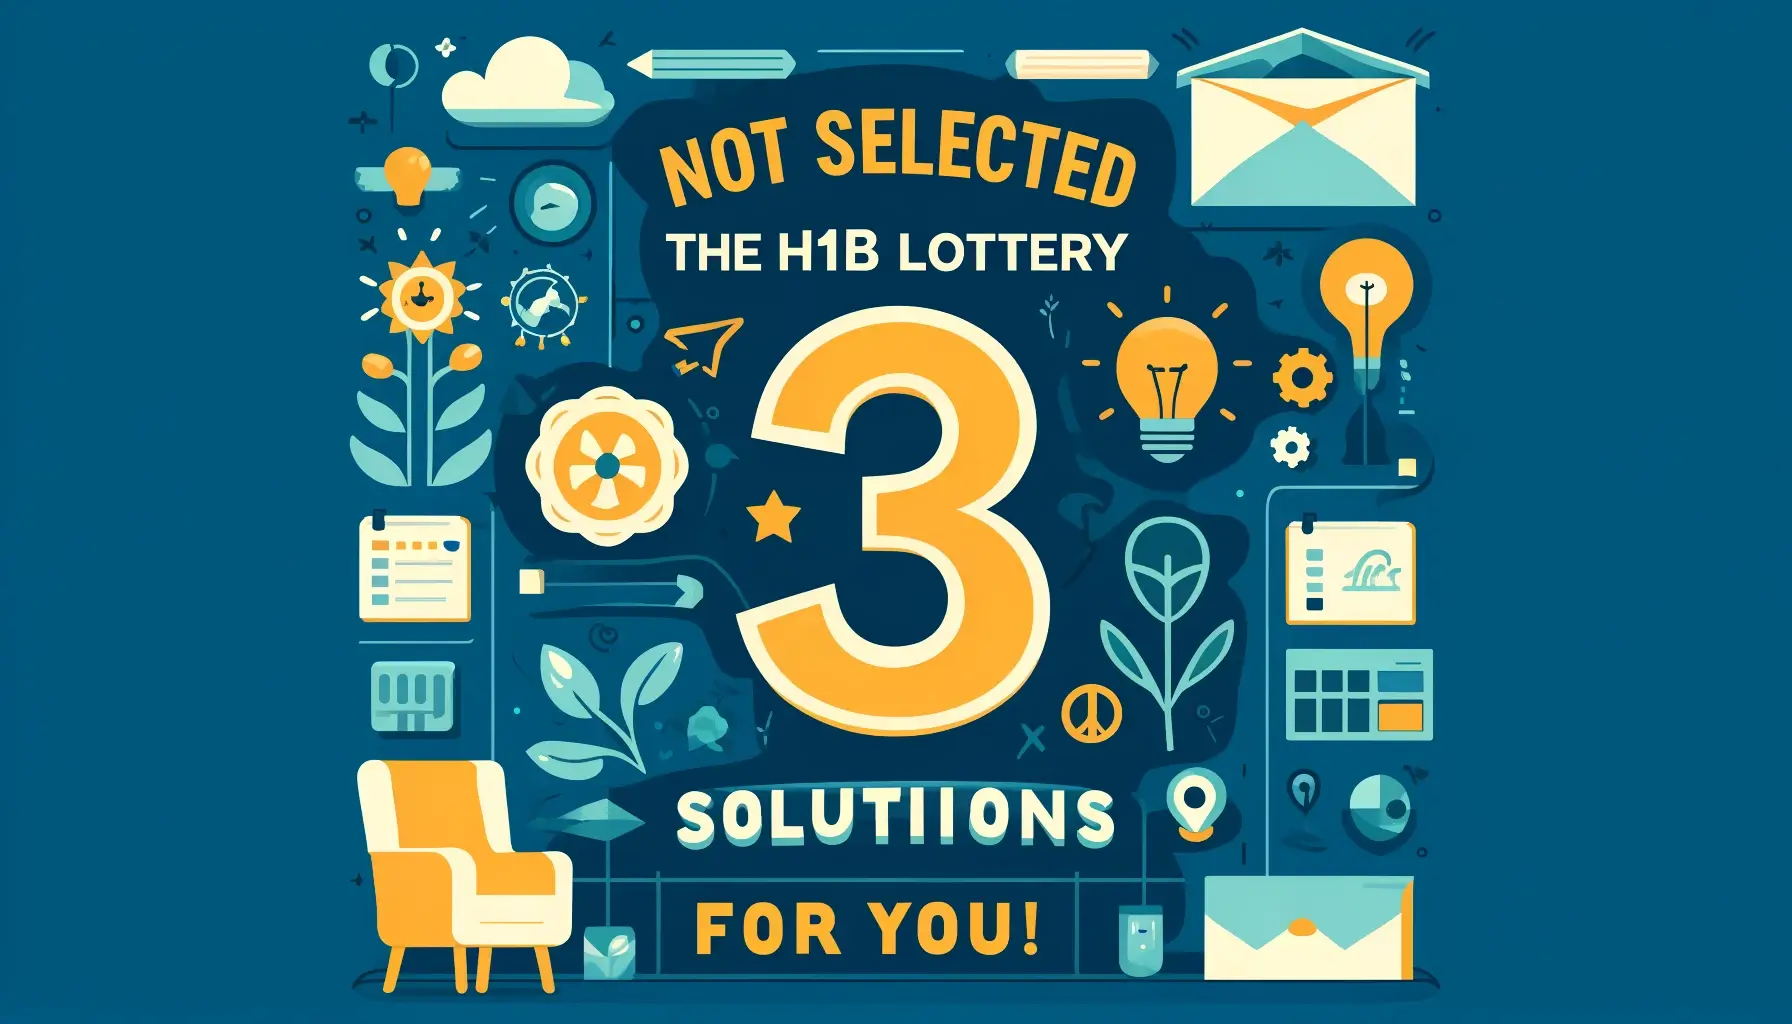 Not selected in the H1b lottery, Here are 3 solutions for You!